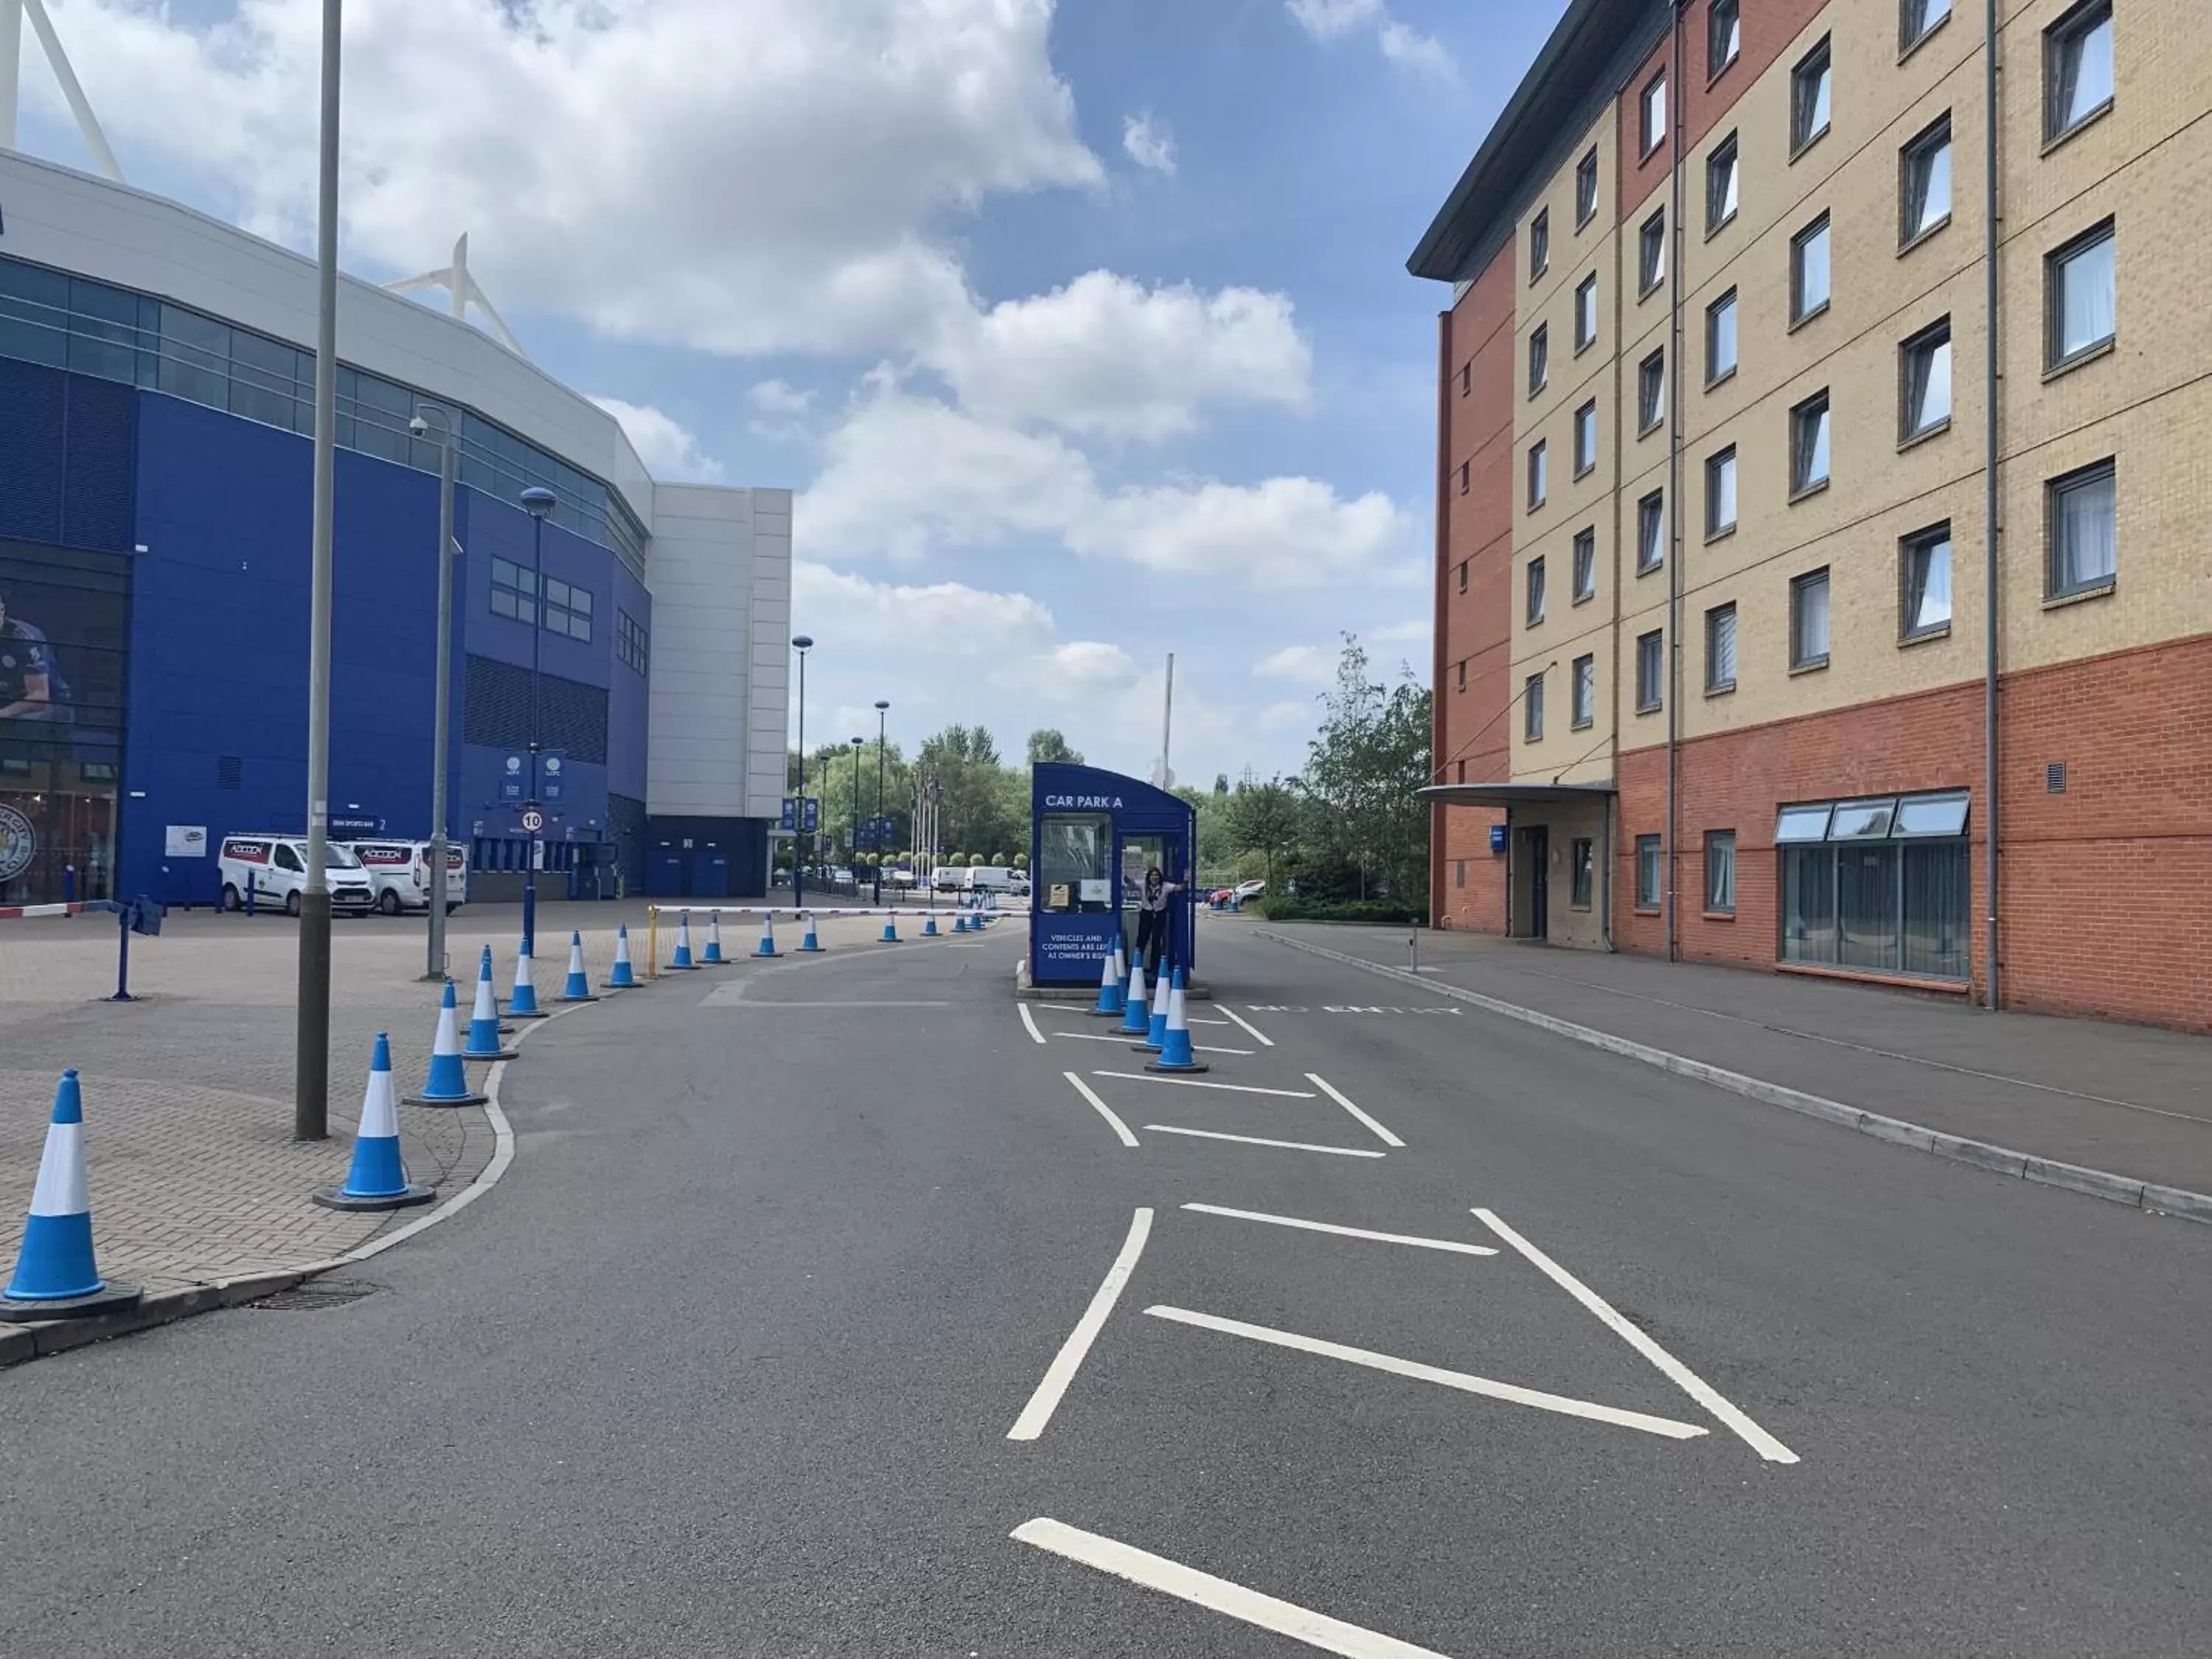 Property building in Holiday Inn Express Leicester